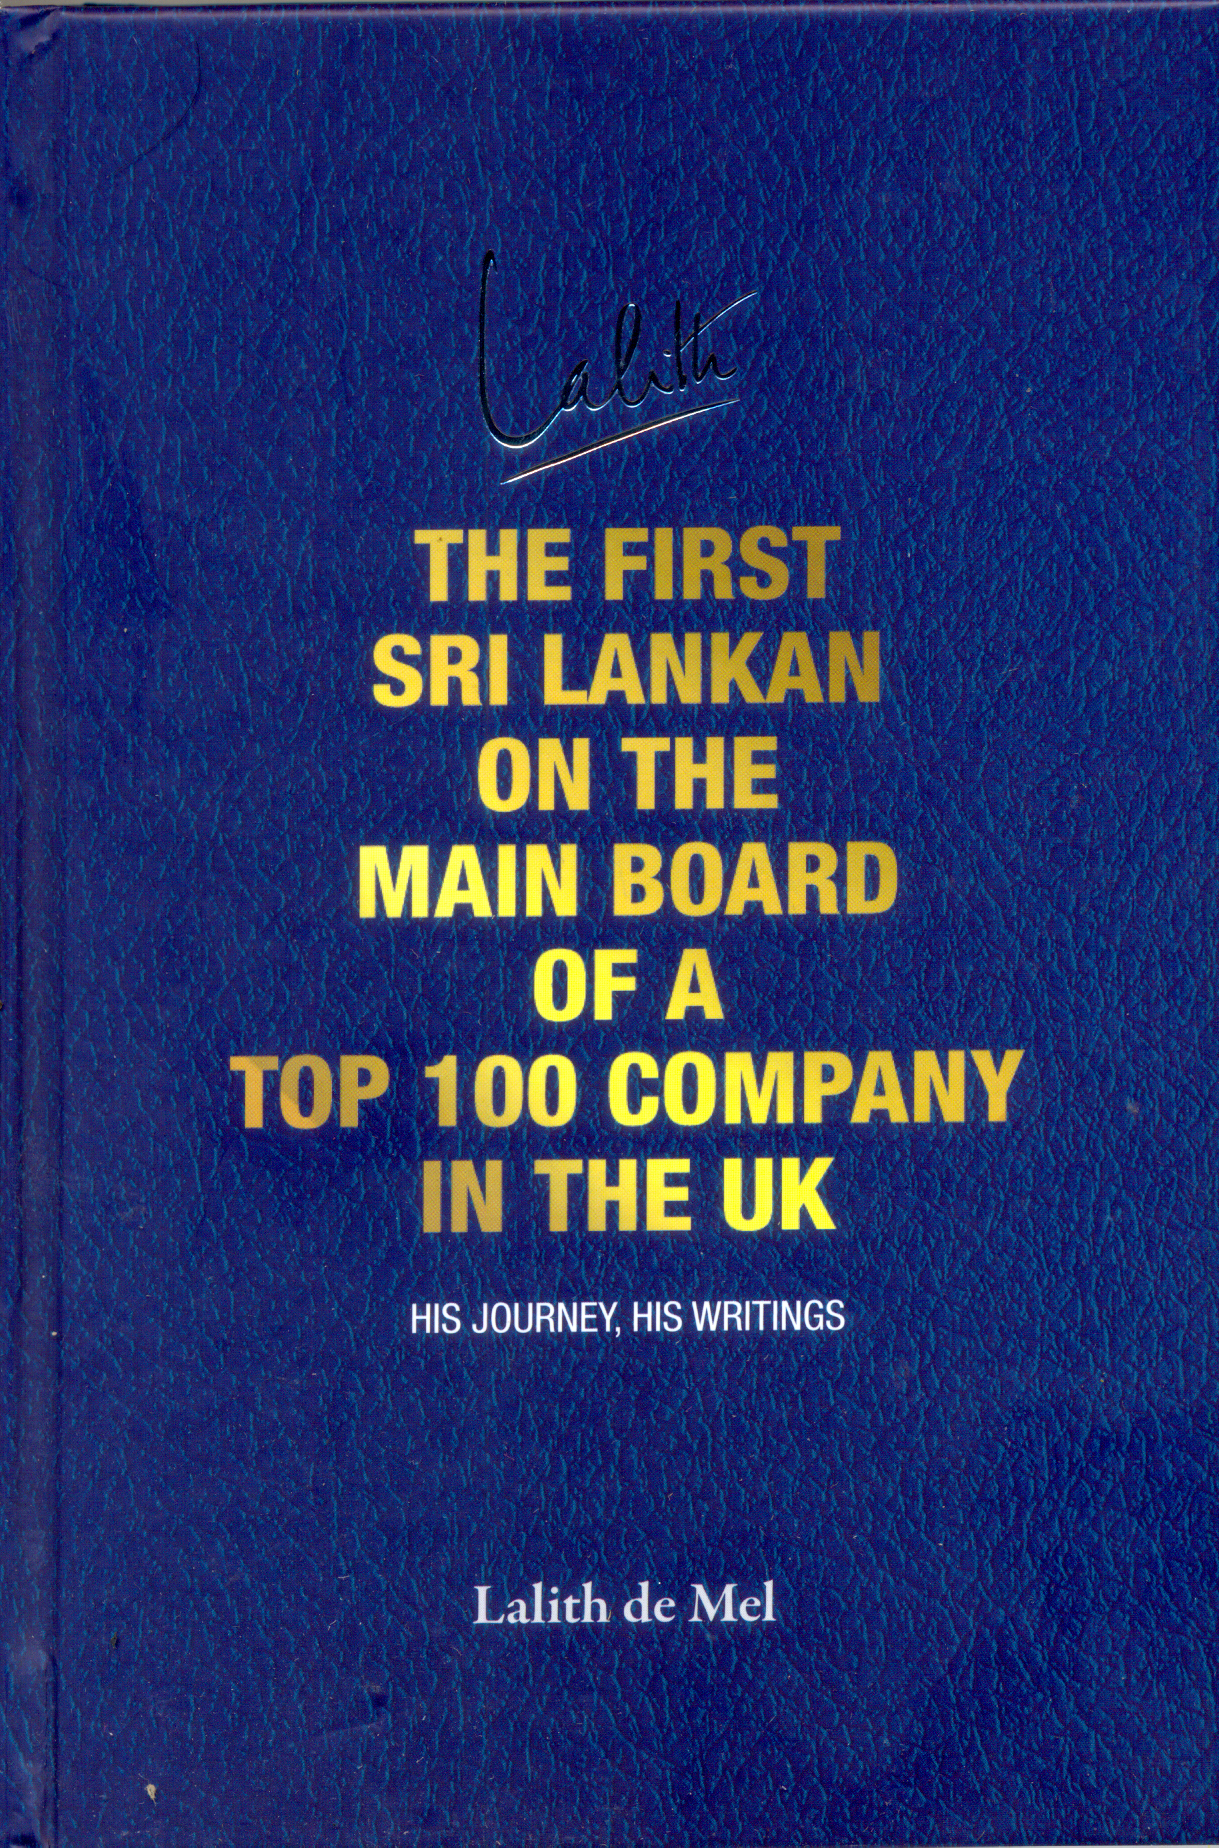 The First Sri Lankan On the Main Board Of A Top 100 Company In The UK 